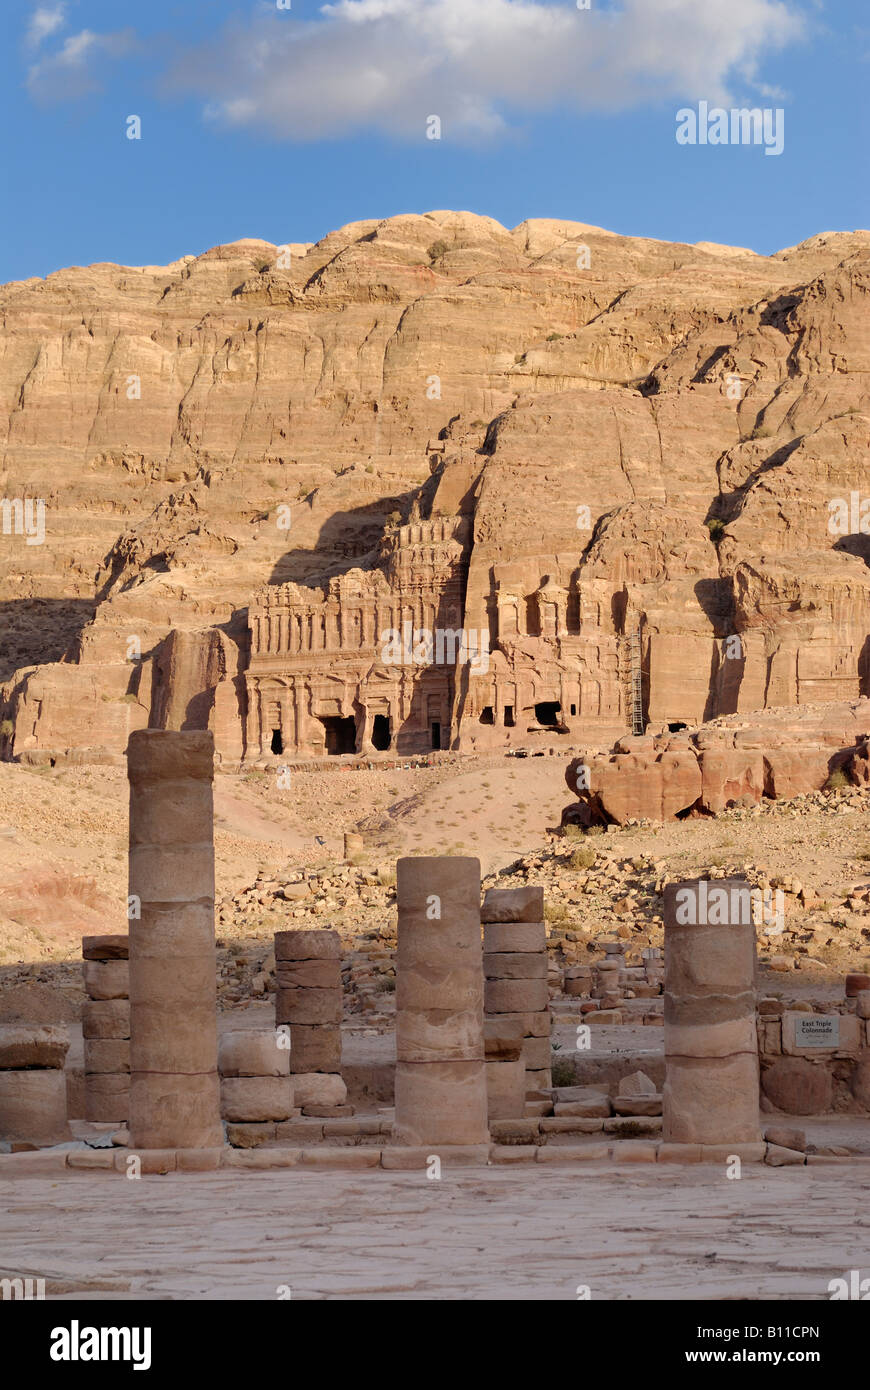 Royal Tombs in front of al Khubtha mountain, columns of the Great Temple Nabataean ancient town Petra Jordan Arabia Stock Photo